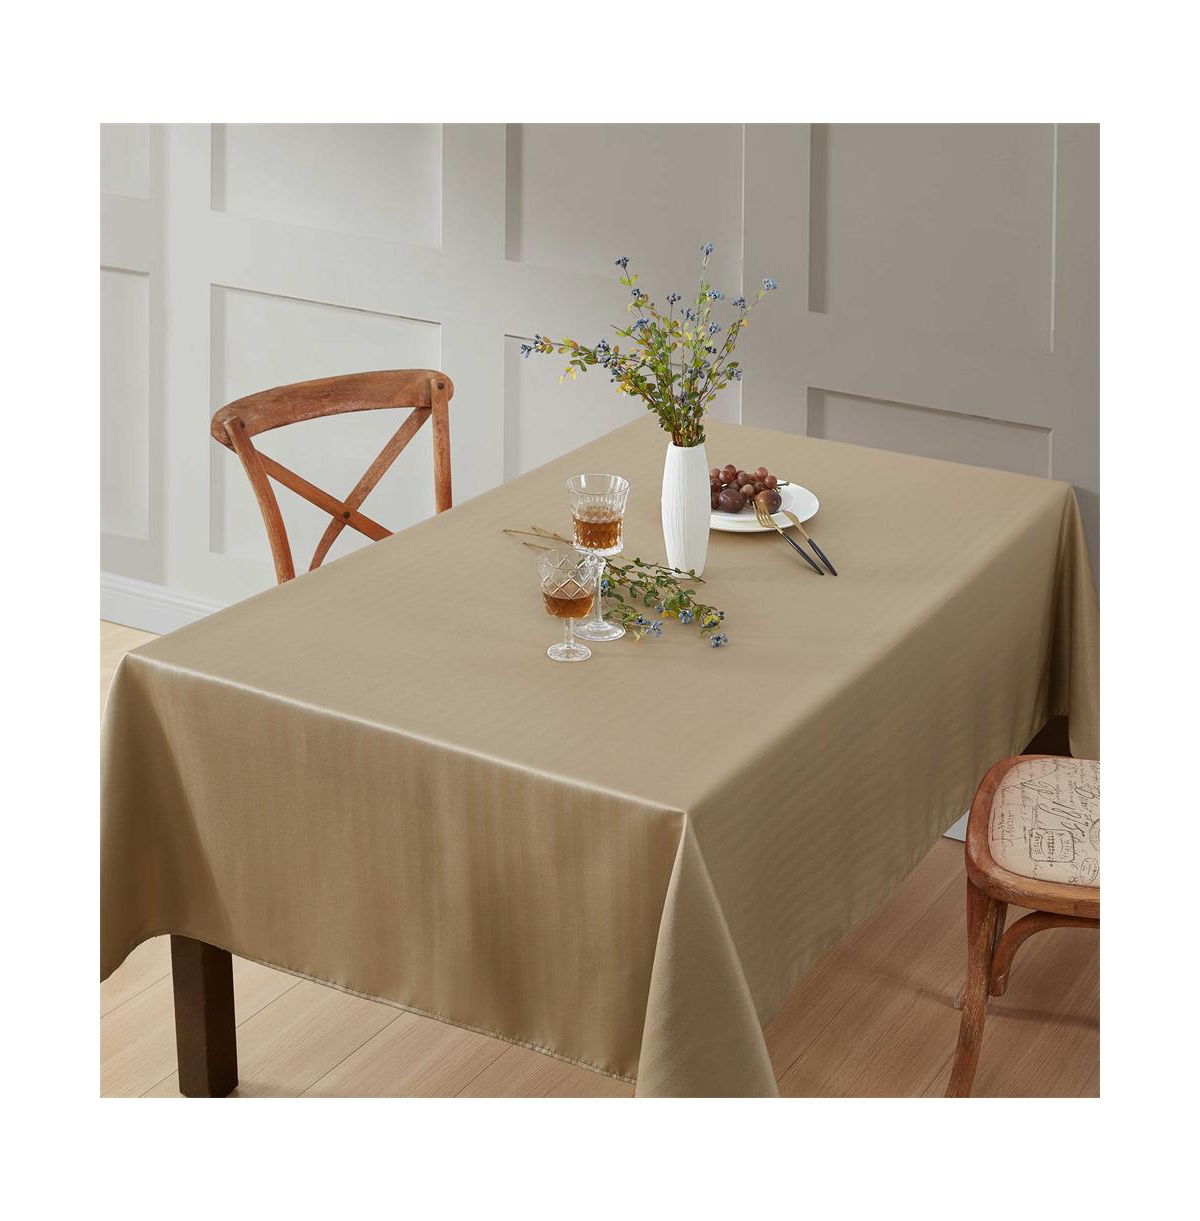 Lincoln Stripe Fabric Tablecloth for Rectangle Table, Advanced Water, Fade, Stain, and Wrinkle Resistance - Taupe